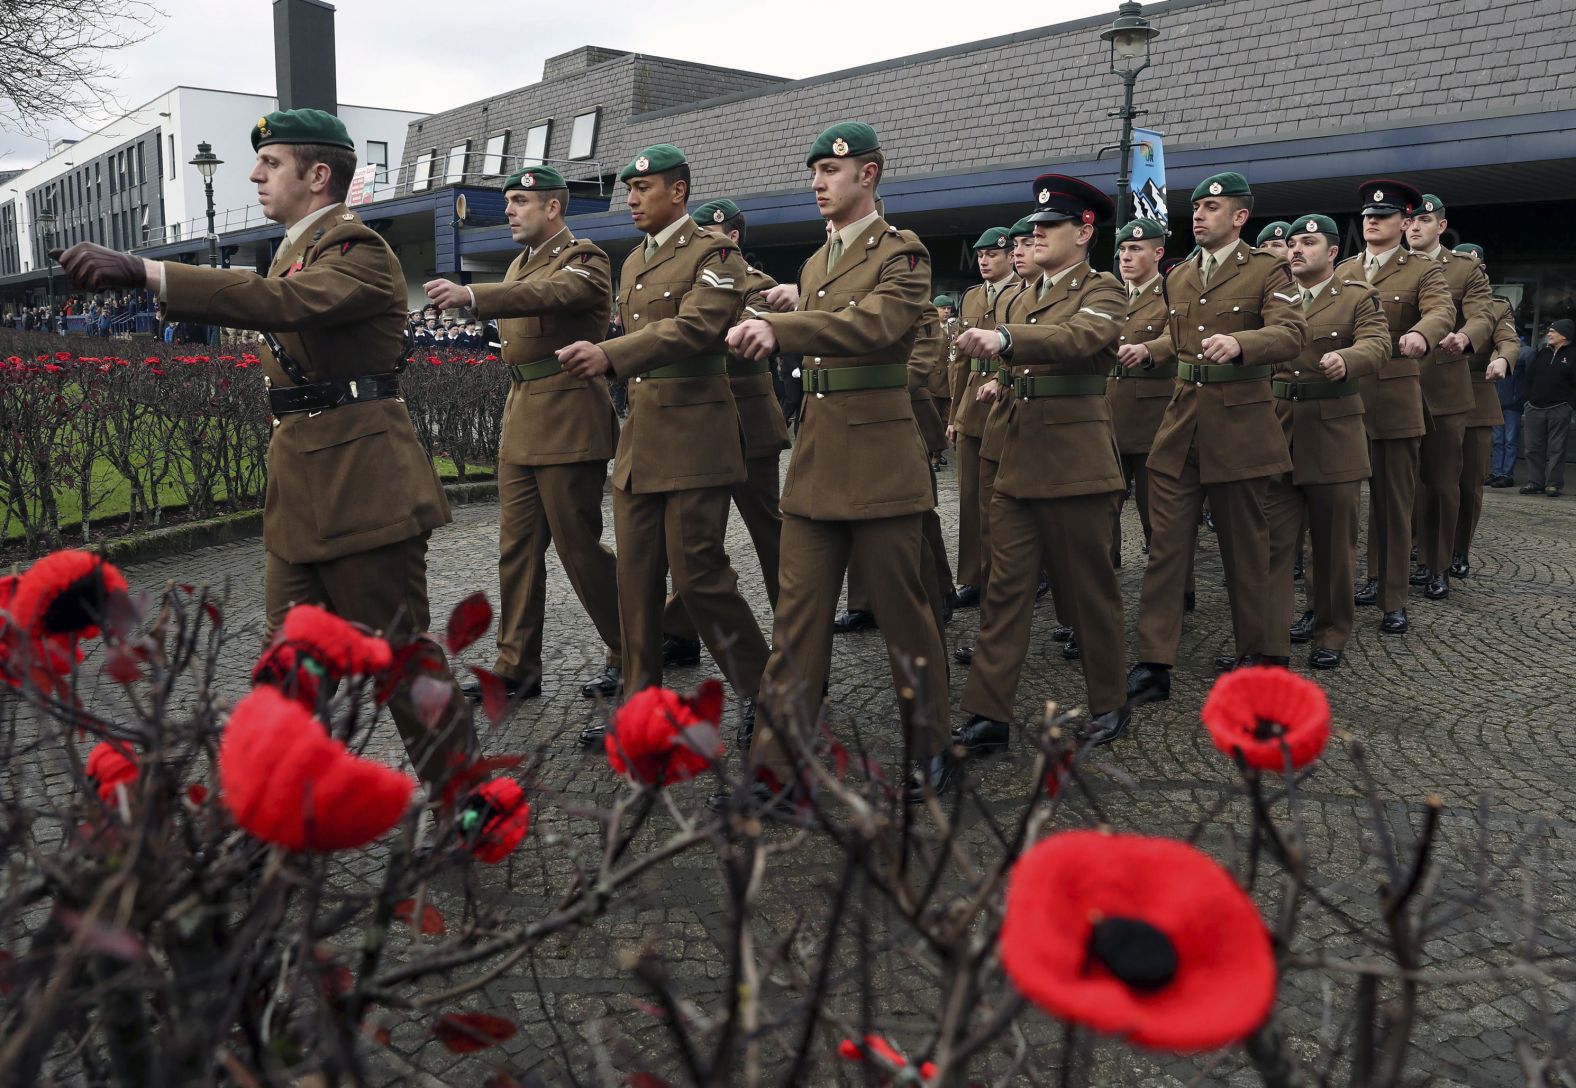 Members of the armed forces take part in a remembrance parade and service in Fort William, Scotland, on Sunday for the centennial of the end of World War I. 